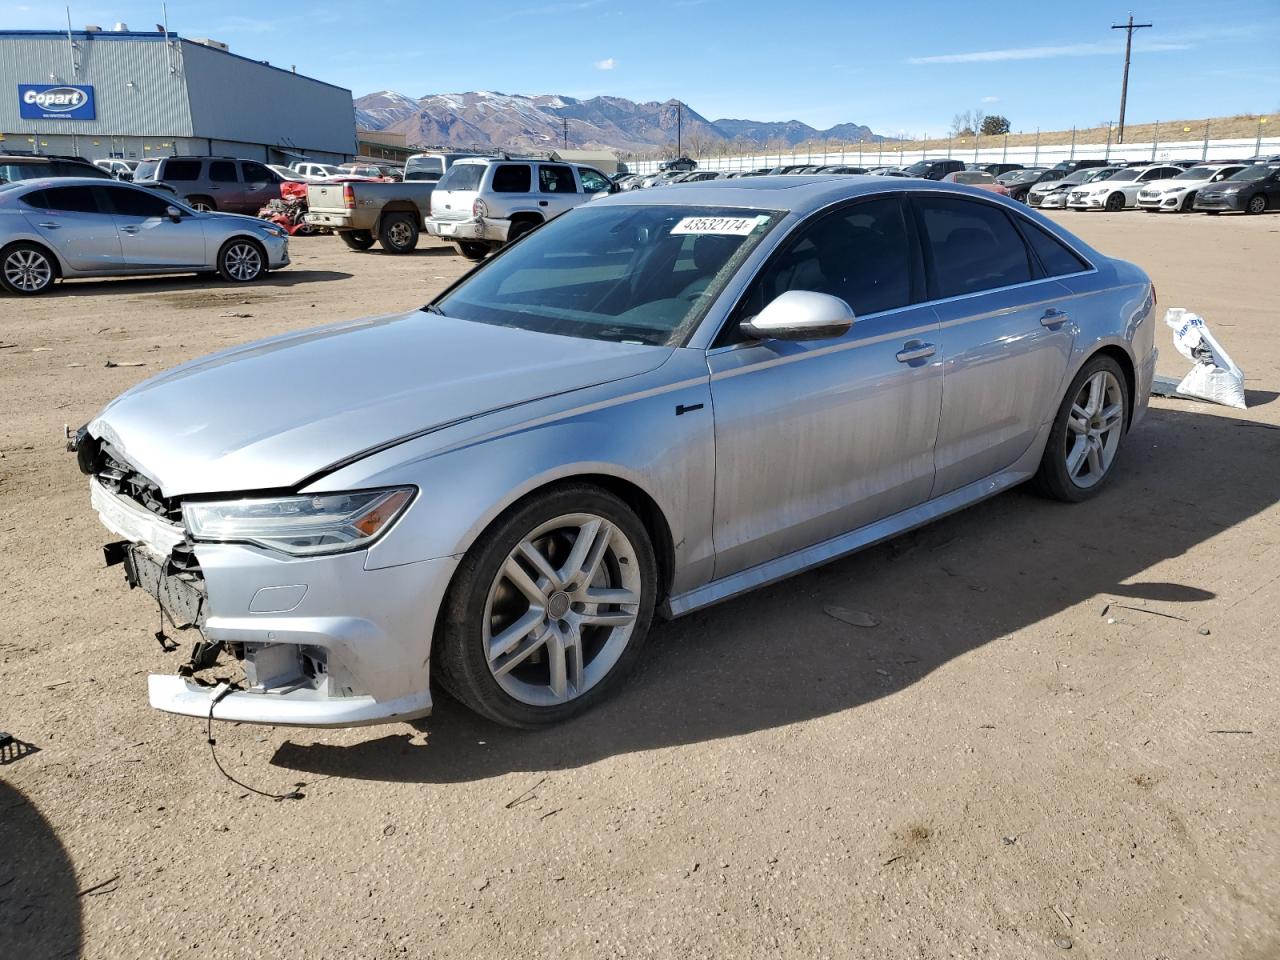 vin: WAUFGAFC3GN099503 WAUFGAFC3GN099503 2016 audi a6 3000 for Sale in 80907 5336, Co - Colorado Springs, Colorado Springs, USA